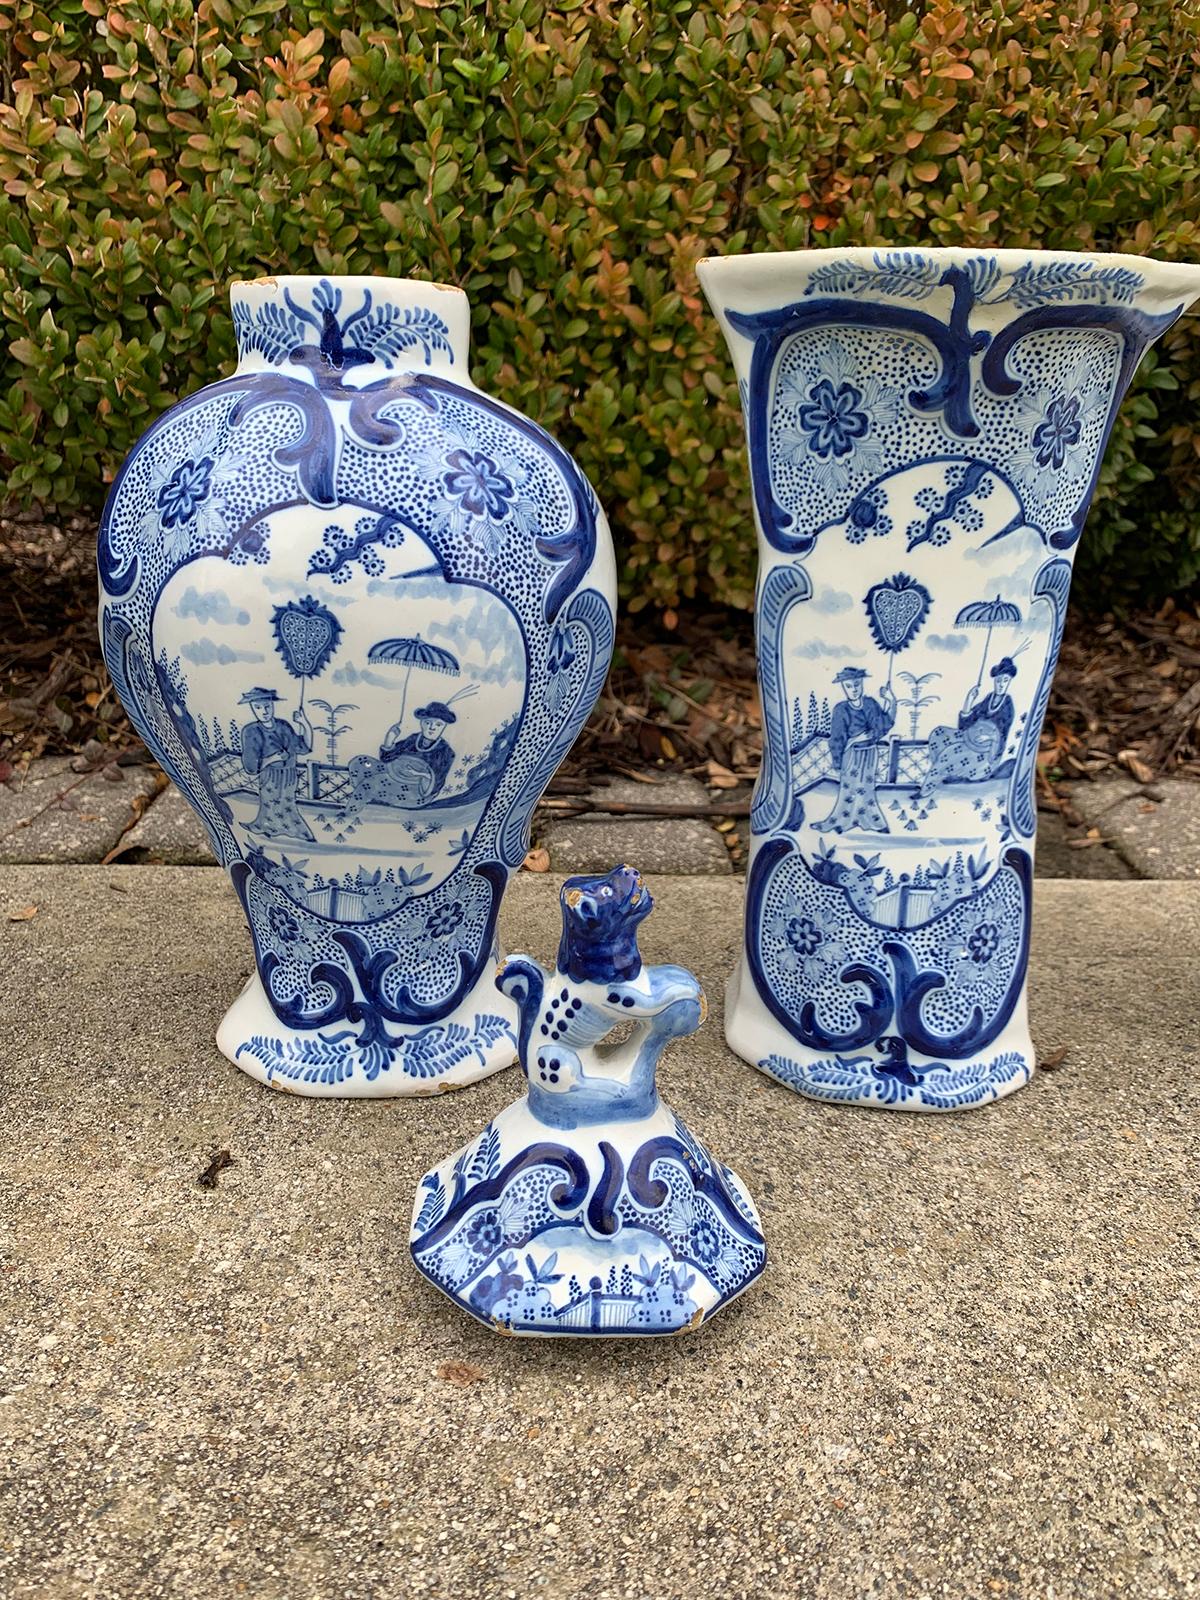 19th Century Five-Piece Delft-Style Blue and White Porcelain Garniture, Marked 6